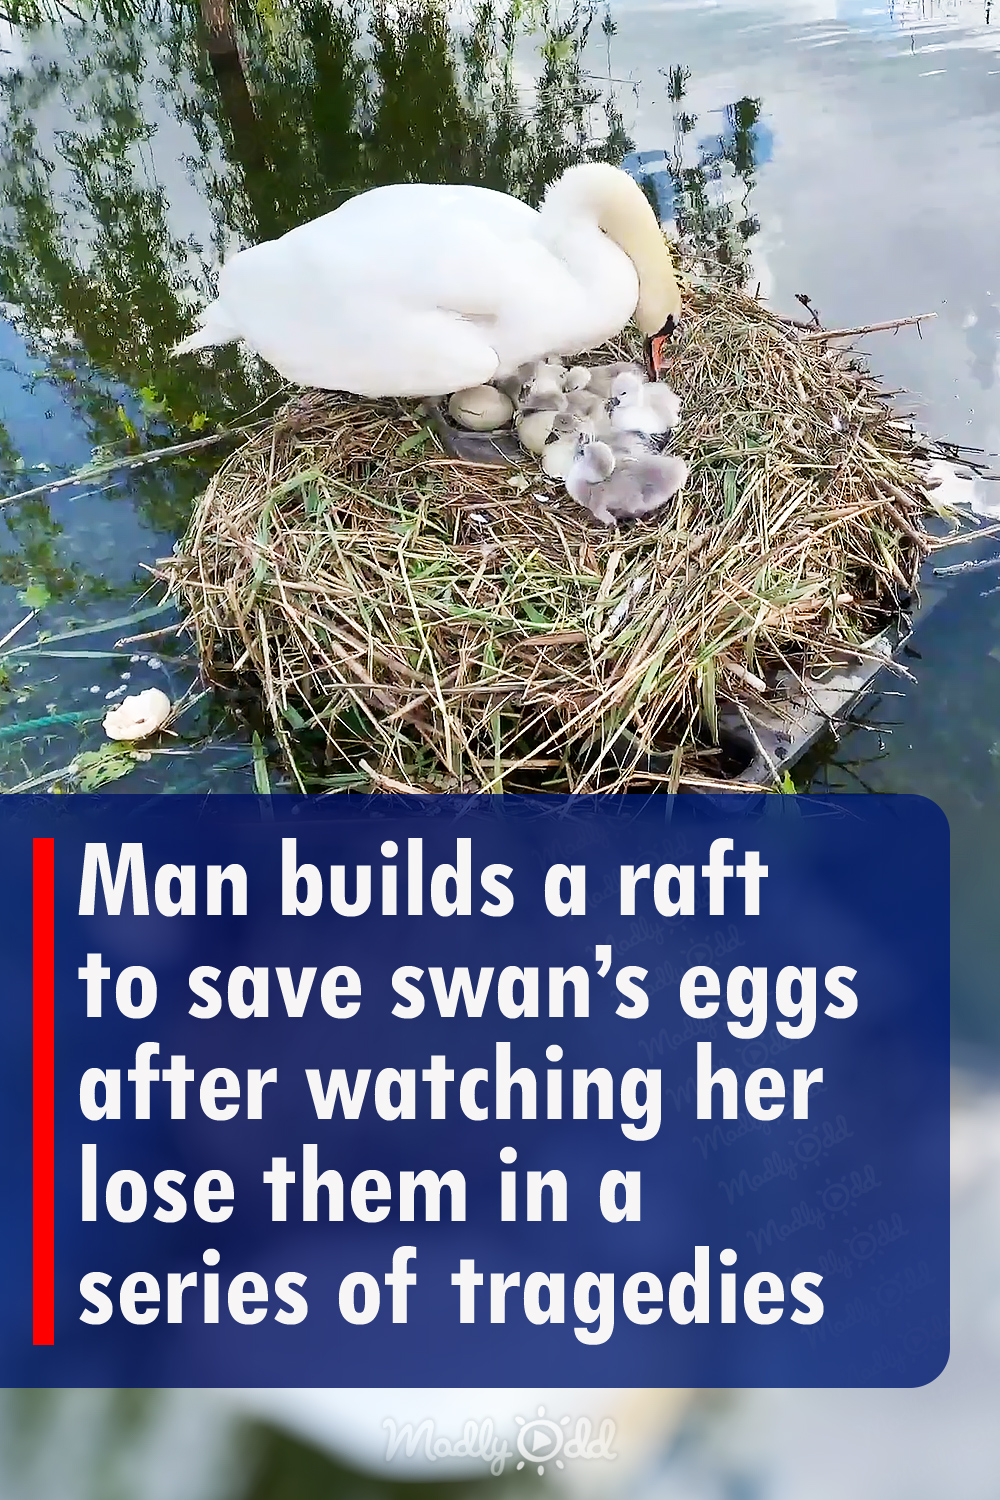 Man builds a raft to save swan’s eggs after watching her lose them in a series of tragedies